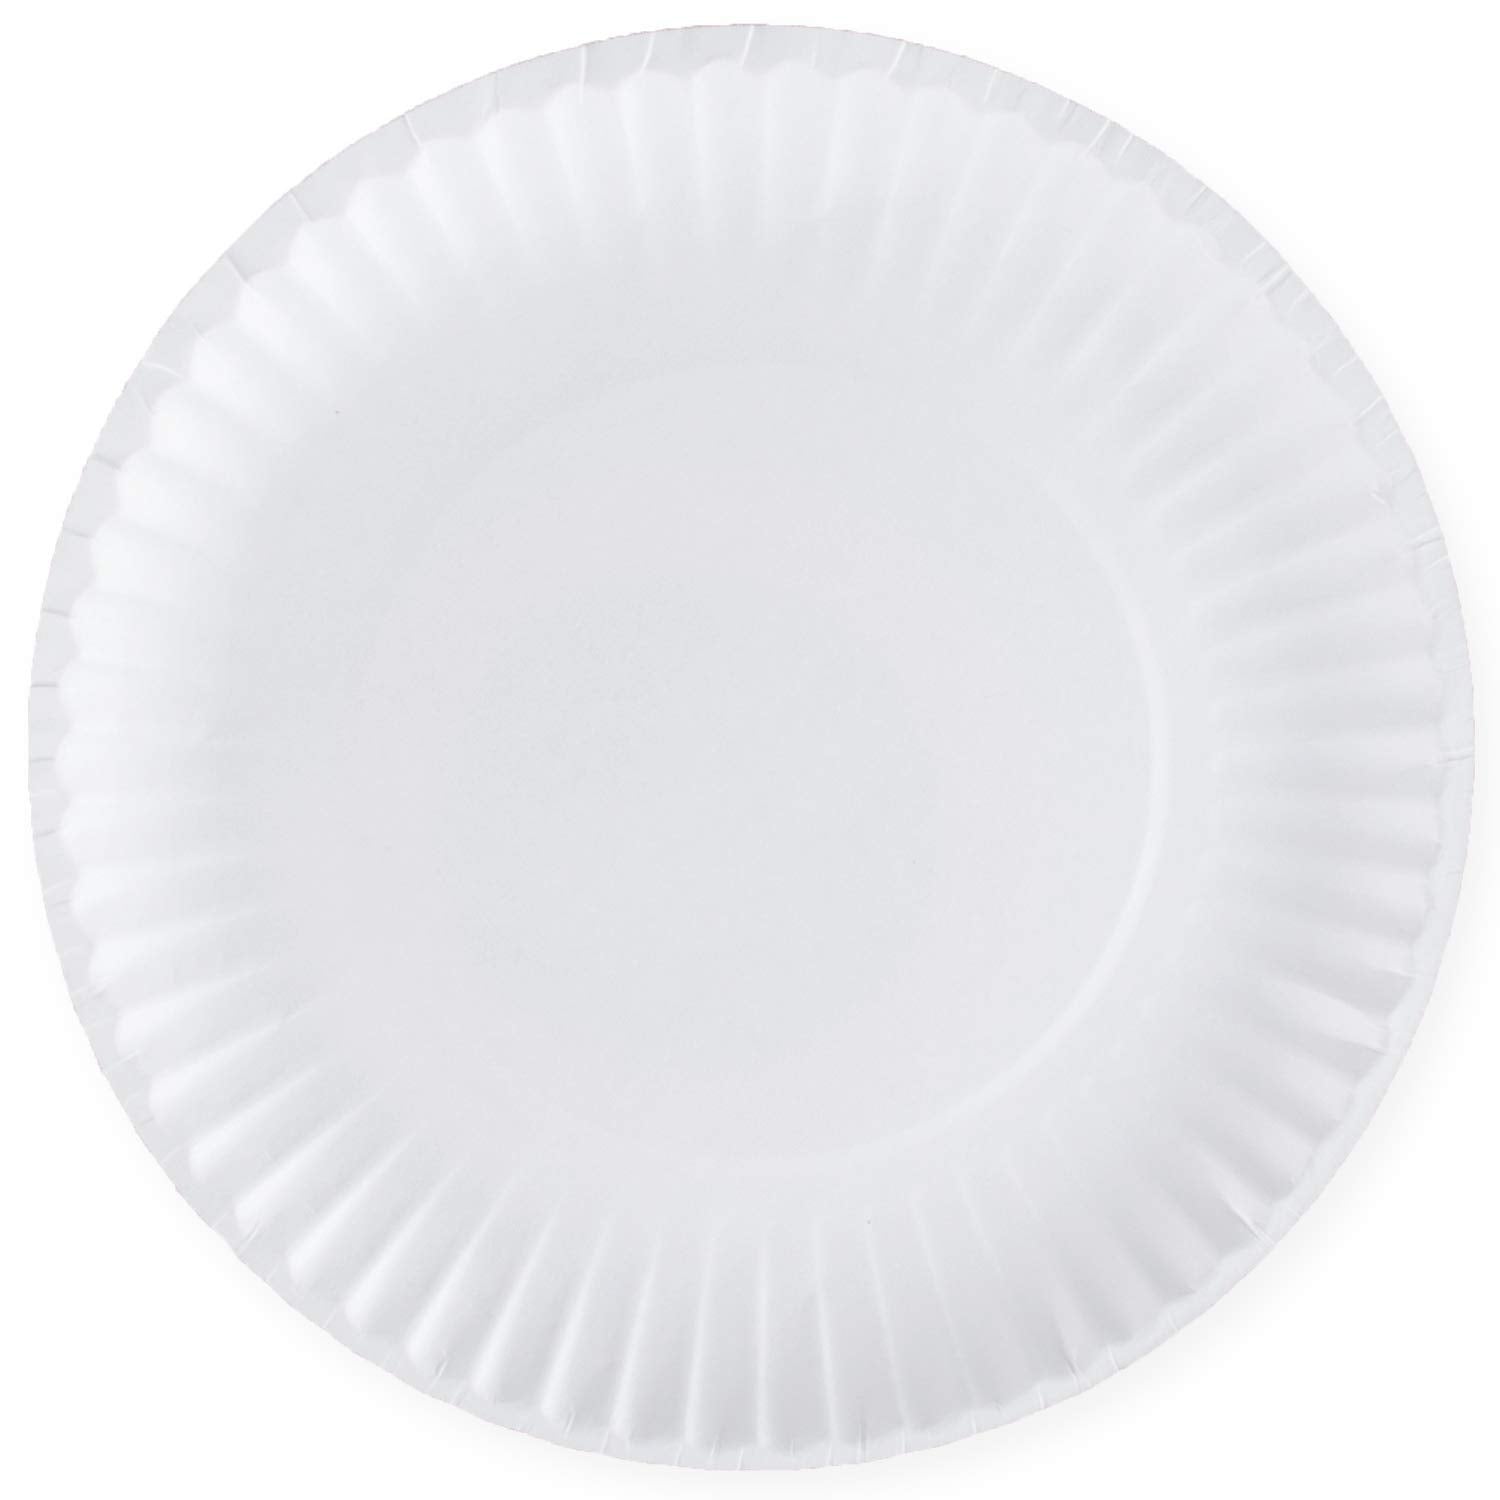 Comfy Package Rectangular Divided Plates Disposable Heavy Duty Paper Plates  Bulk, 125-Pack